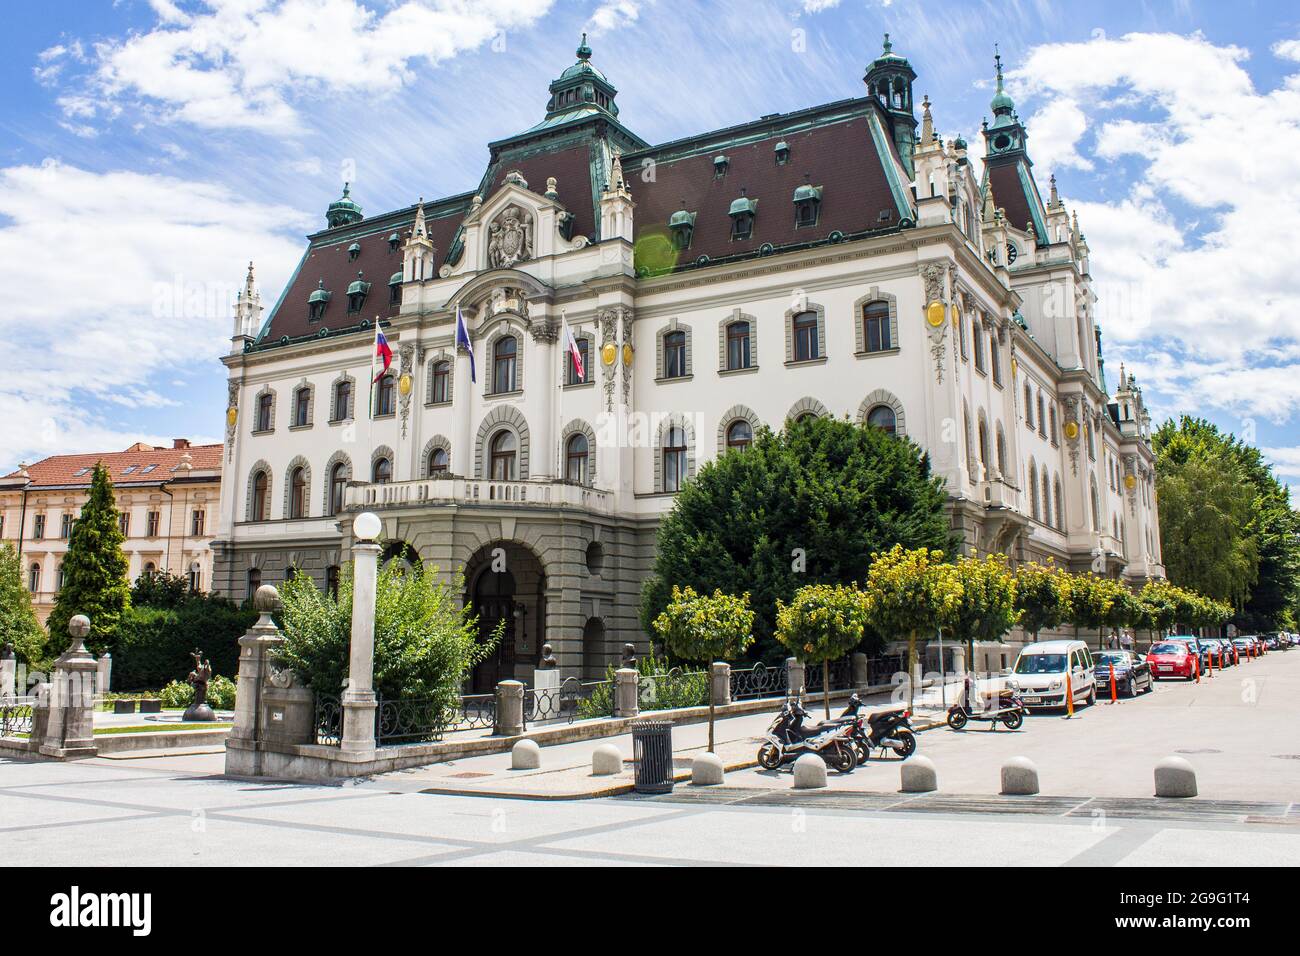 Ljubljana, Slovenia - July 15, 2017: View of the University Building in Congress Square on a Sunny Day Stock Photo